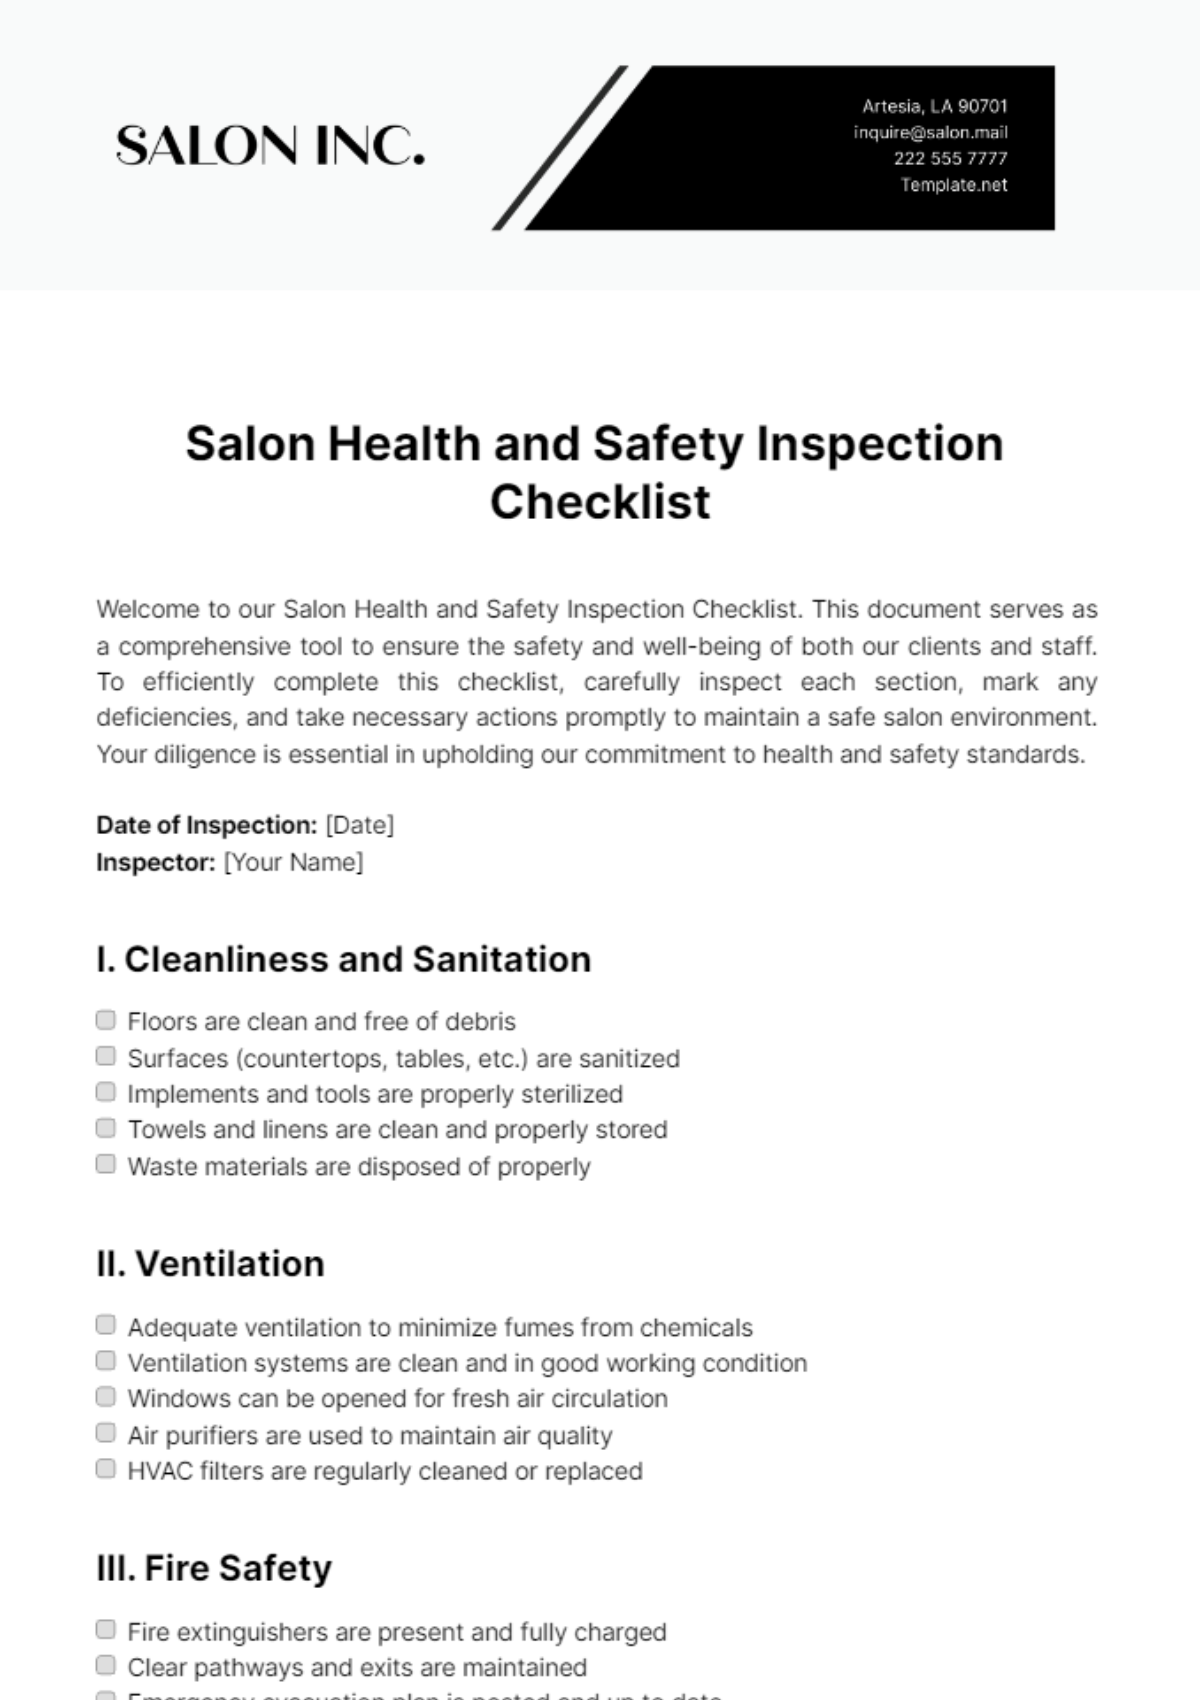 Free Salon Health and Safety Inspection Checklist Template